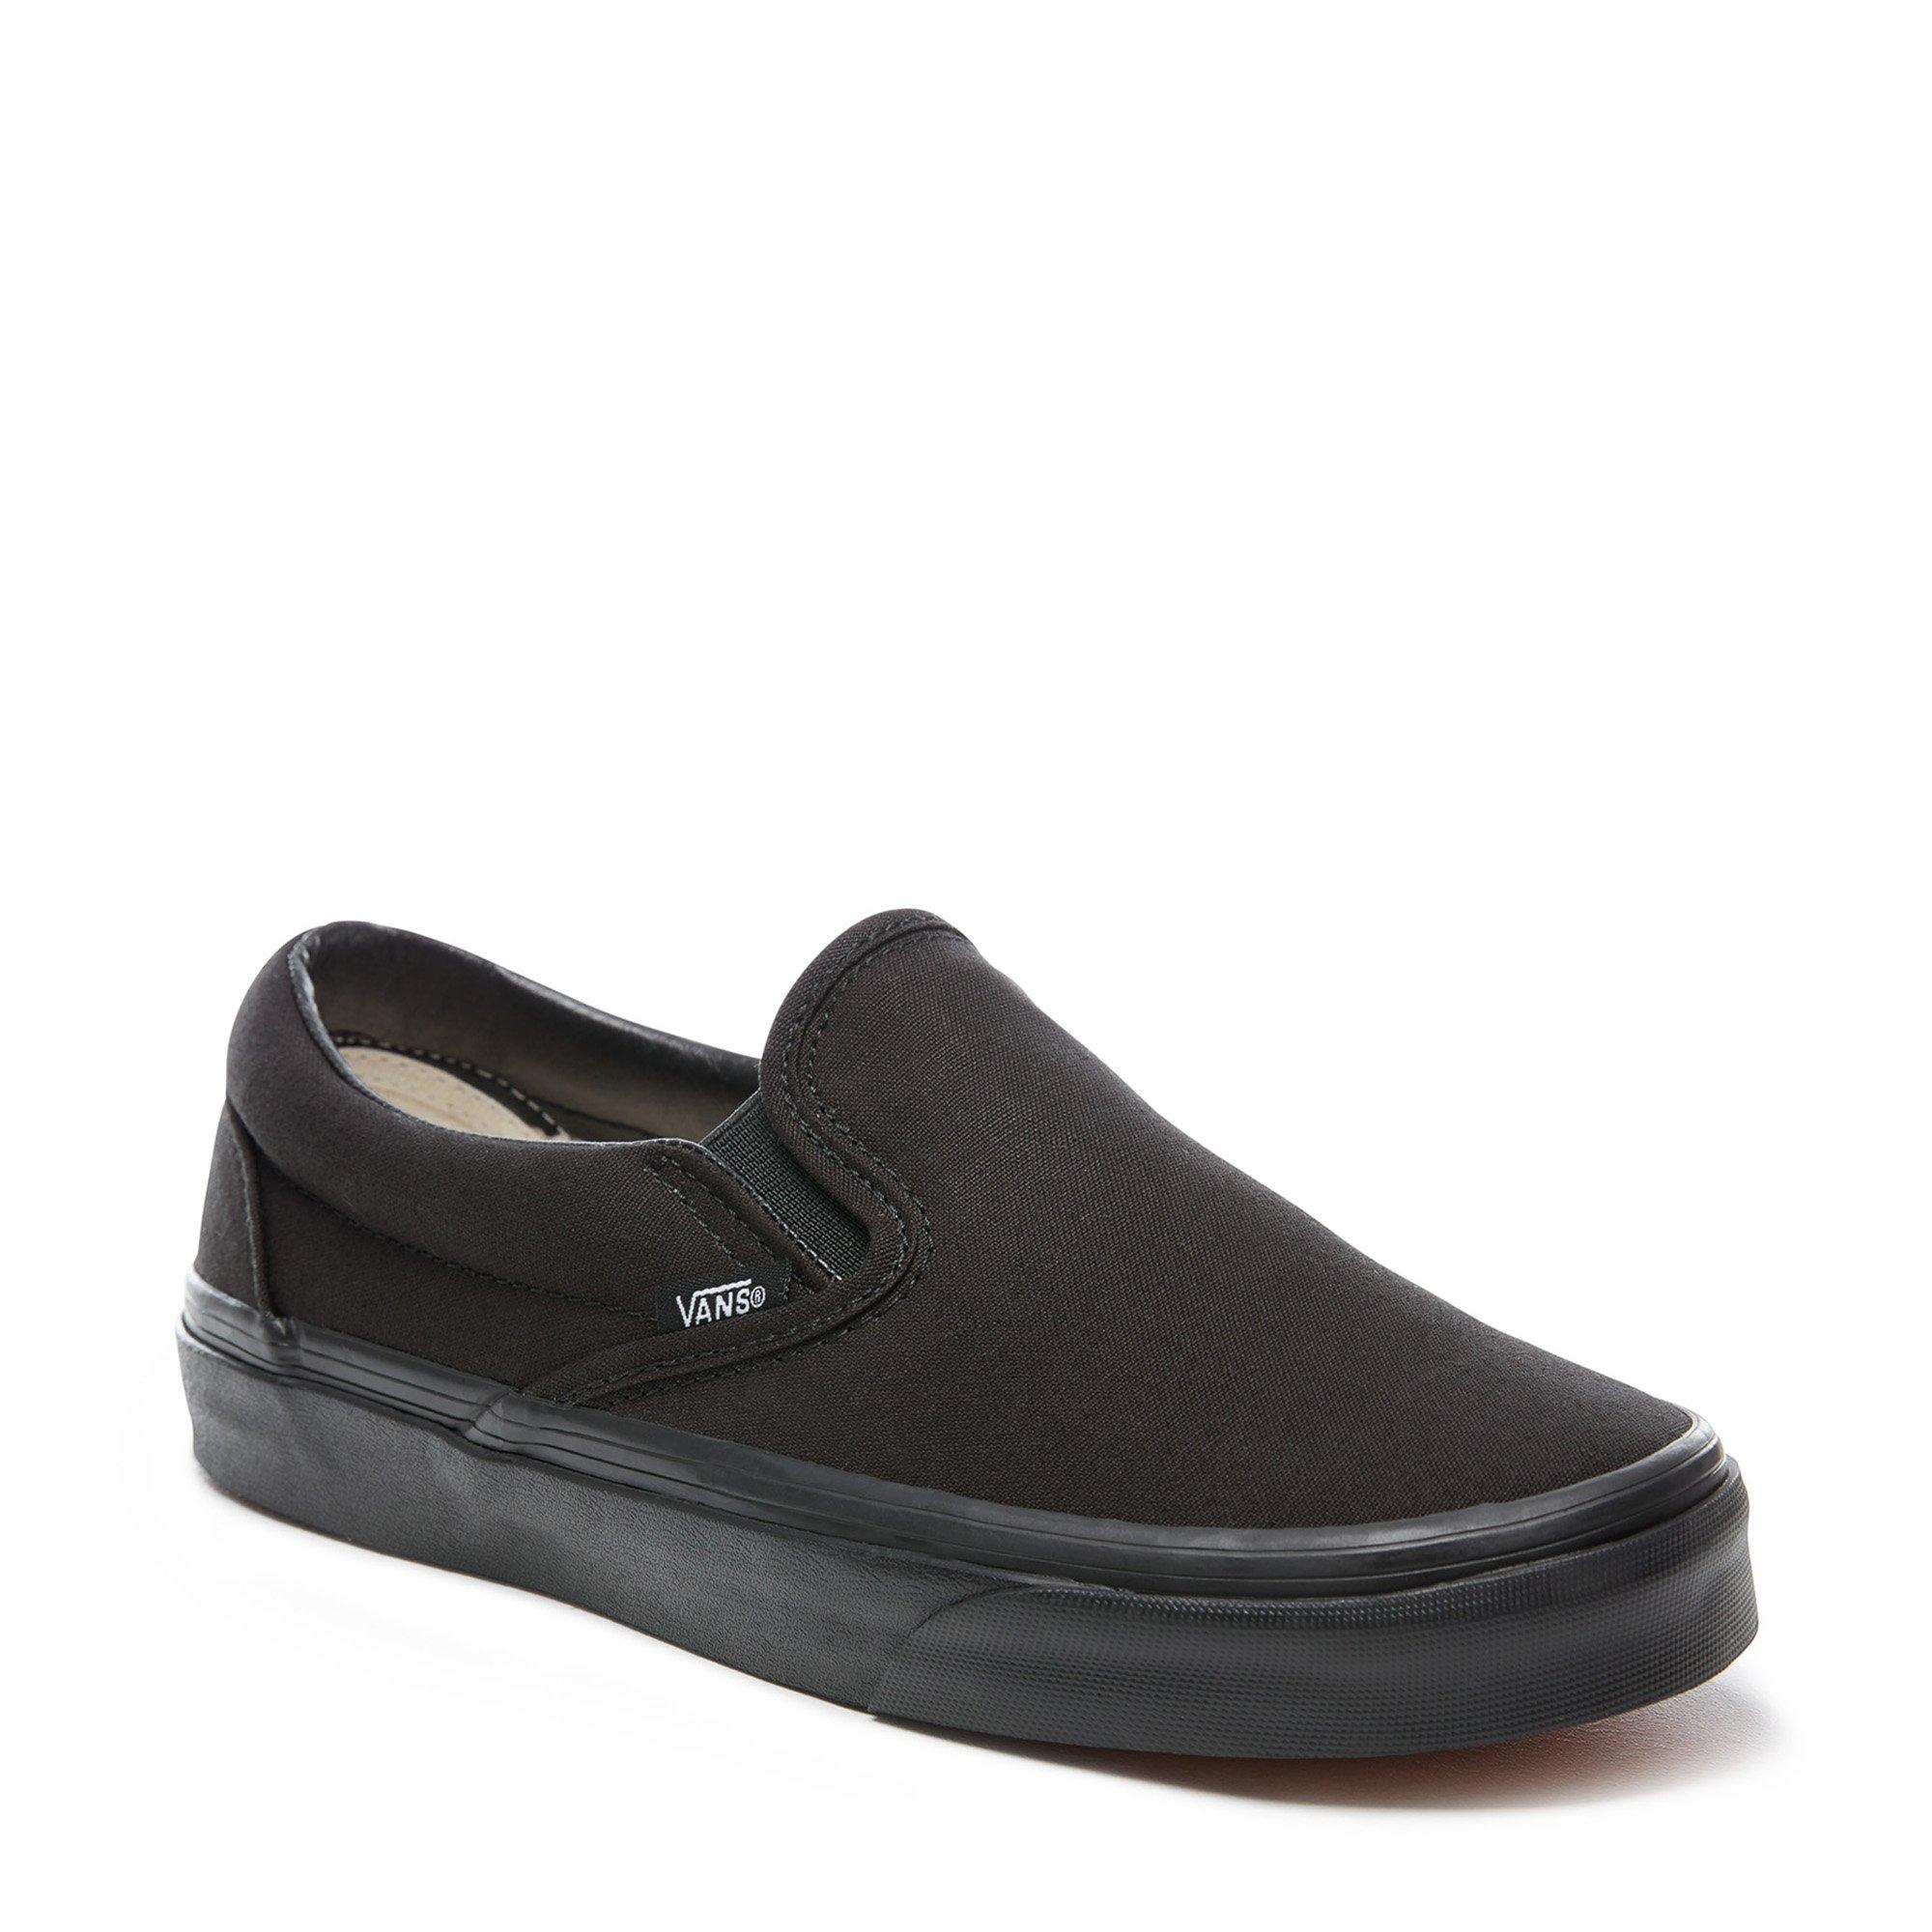 VANS Classic Slip-On Loafers 